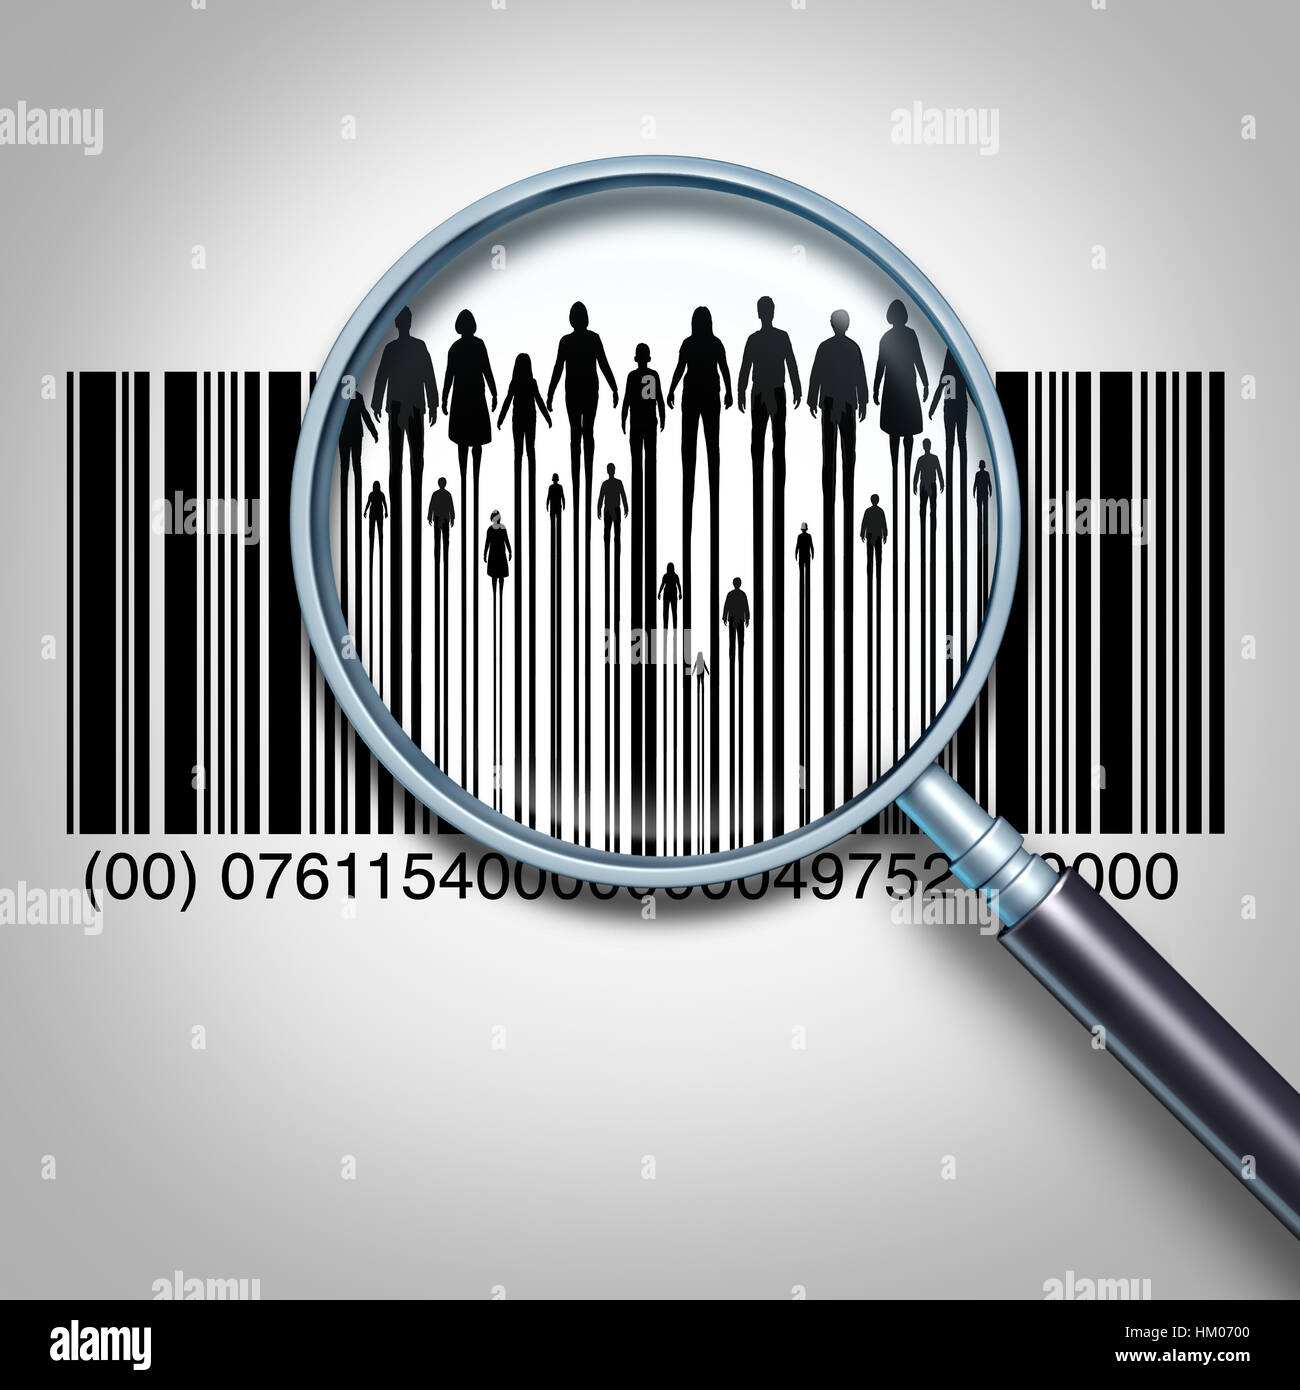 Customer search and searching for client data or purchaser information business concept as a magnifying glass focused on a retail product bar code. Stock Photo